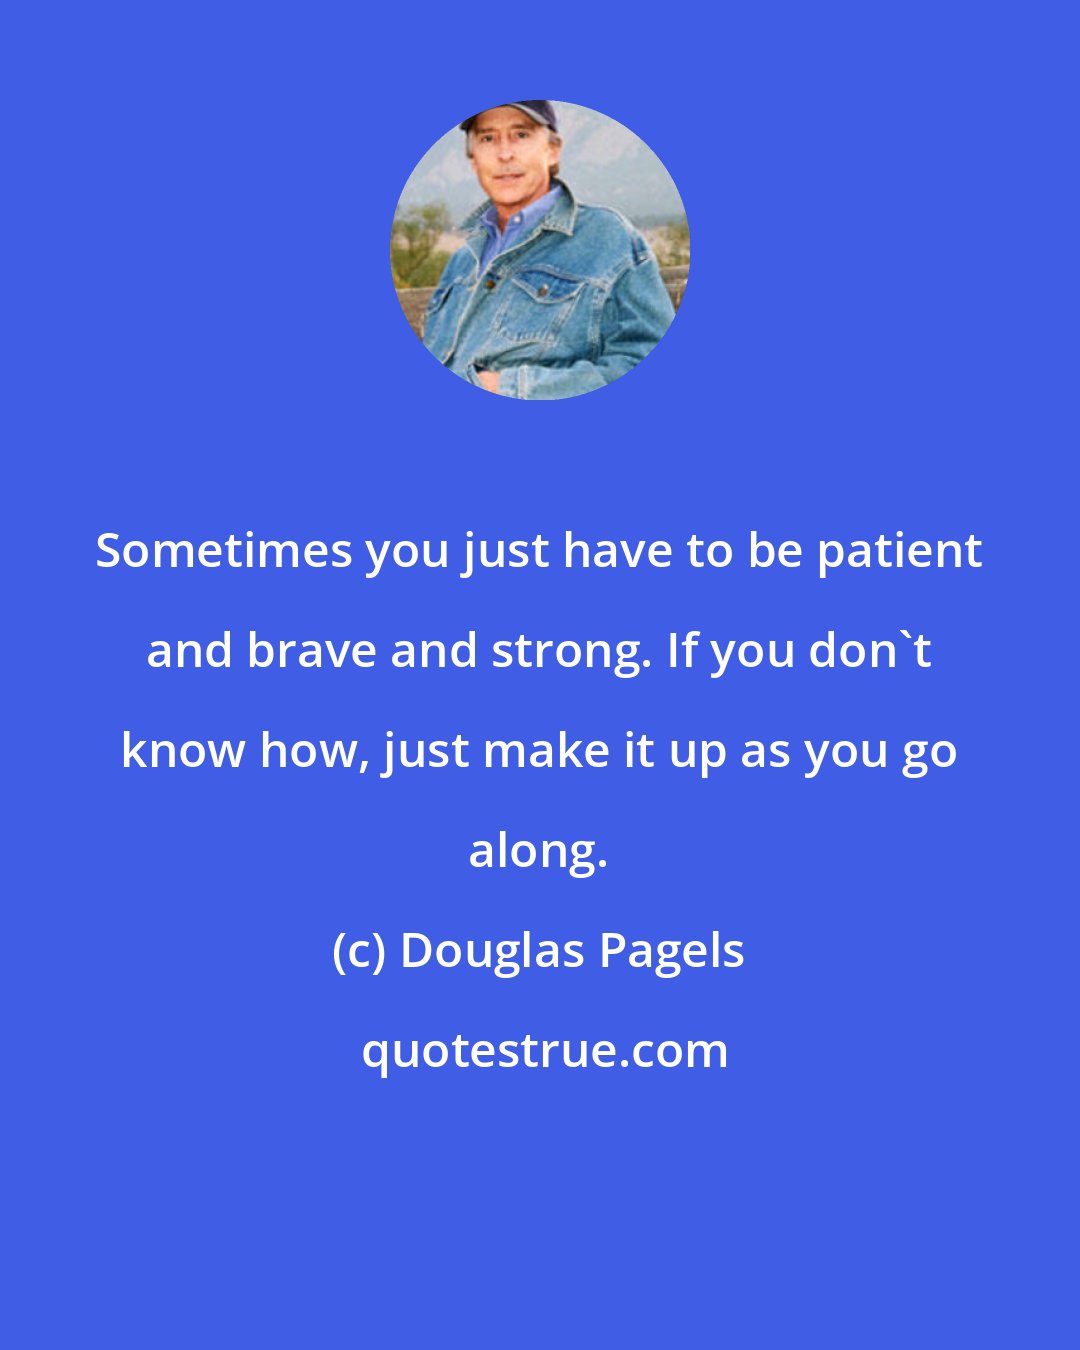 Douglas Pagels: Sometimes you just have to be patient and brave and strong. If you don't know how, just make it up as you go along.